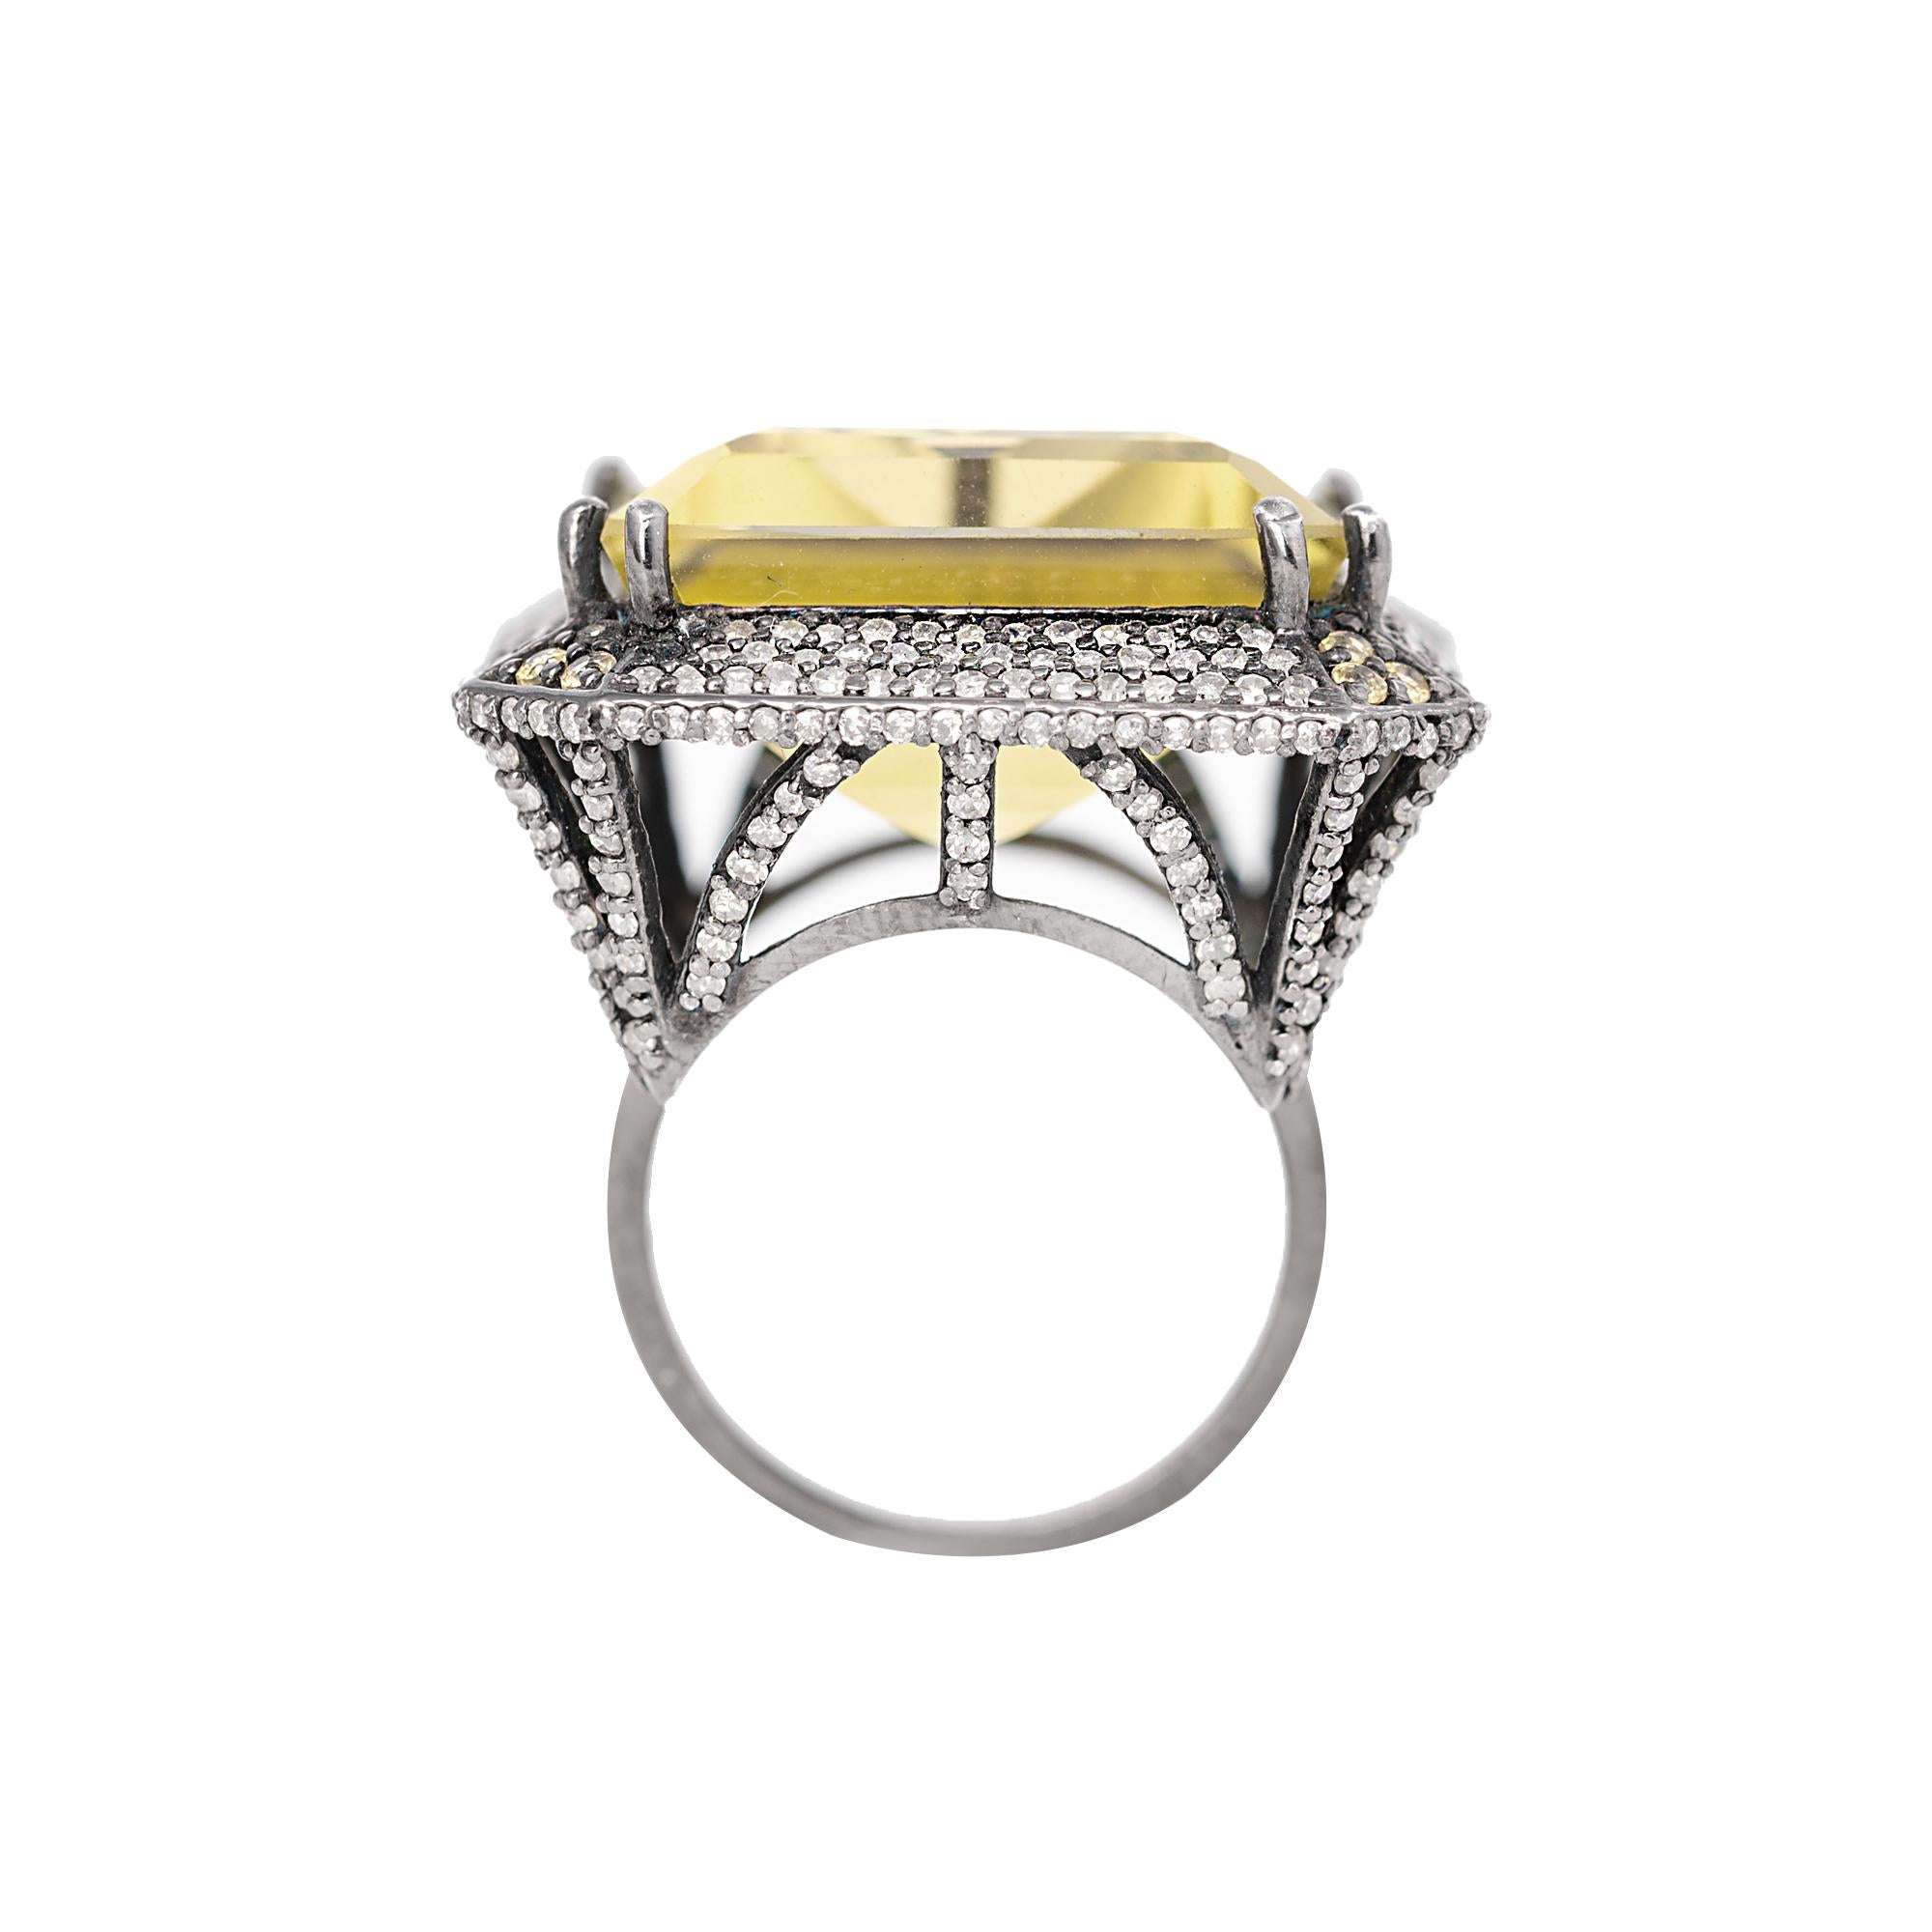 Emerald Cut 47.81 Carat Lemon Topaz and Diamond Cluster Cocktail Ring in Victorian Style For Sale